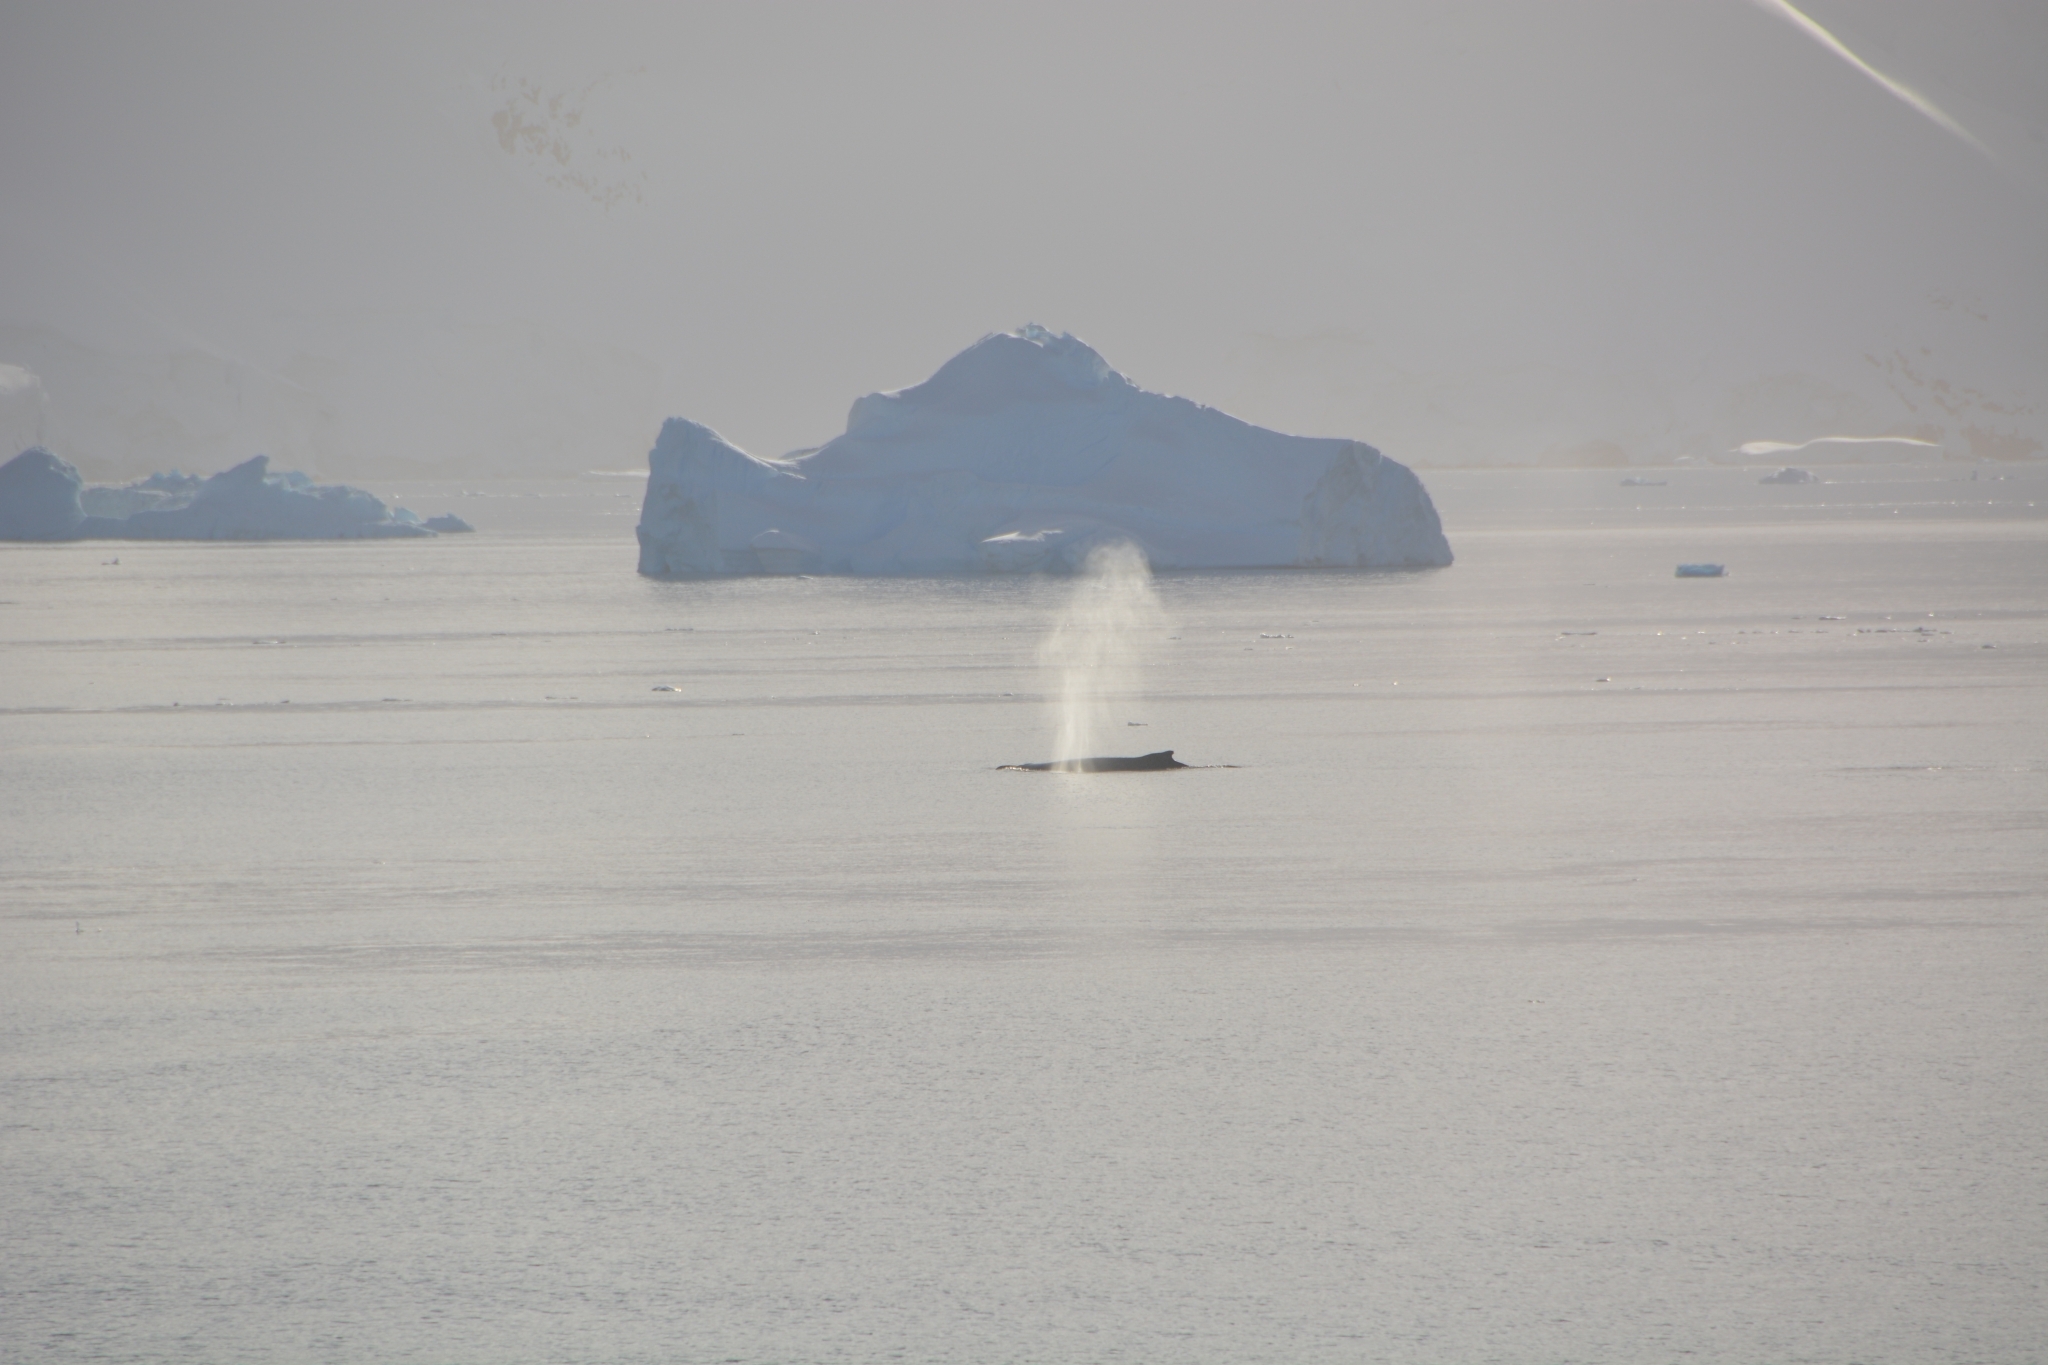 A humpback whale breathing infront of an iceberg